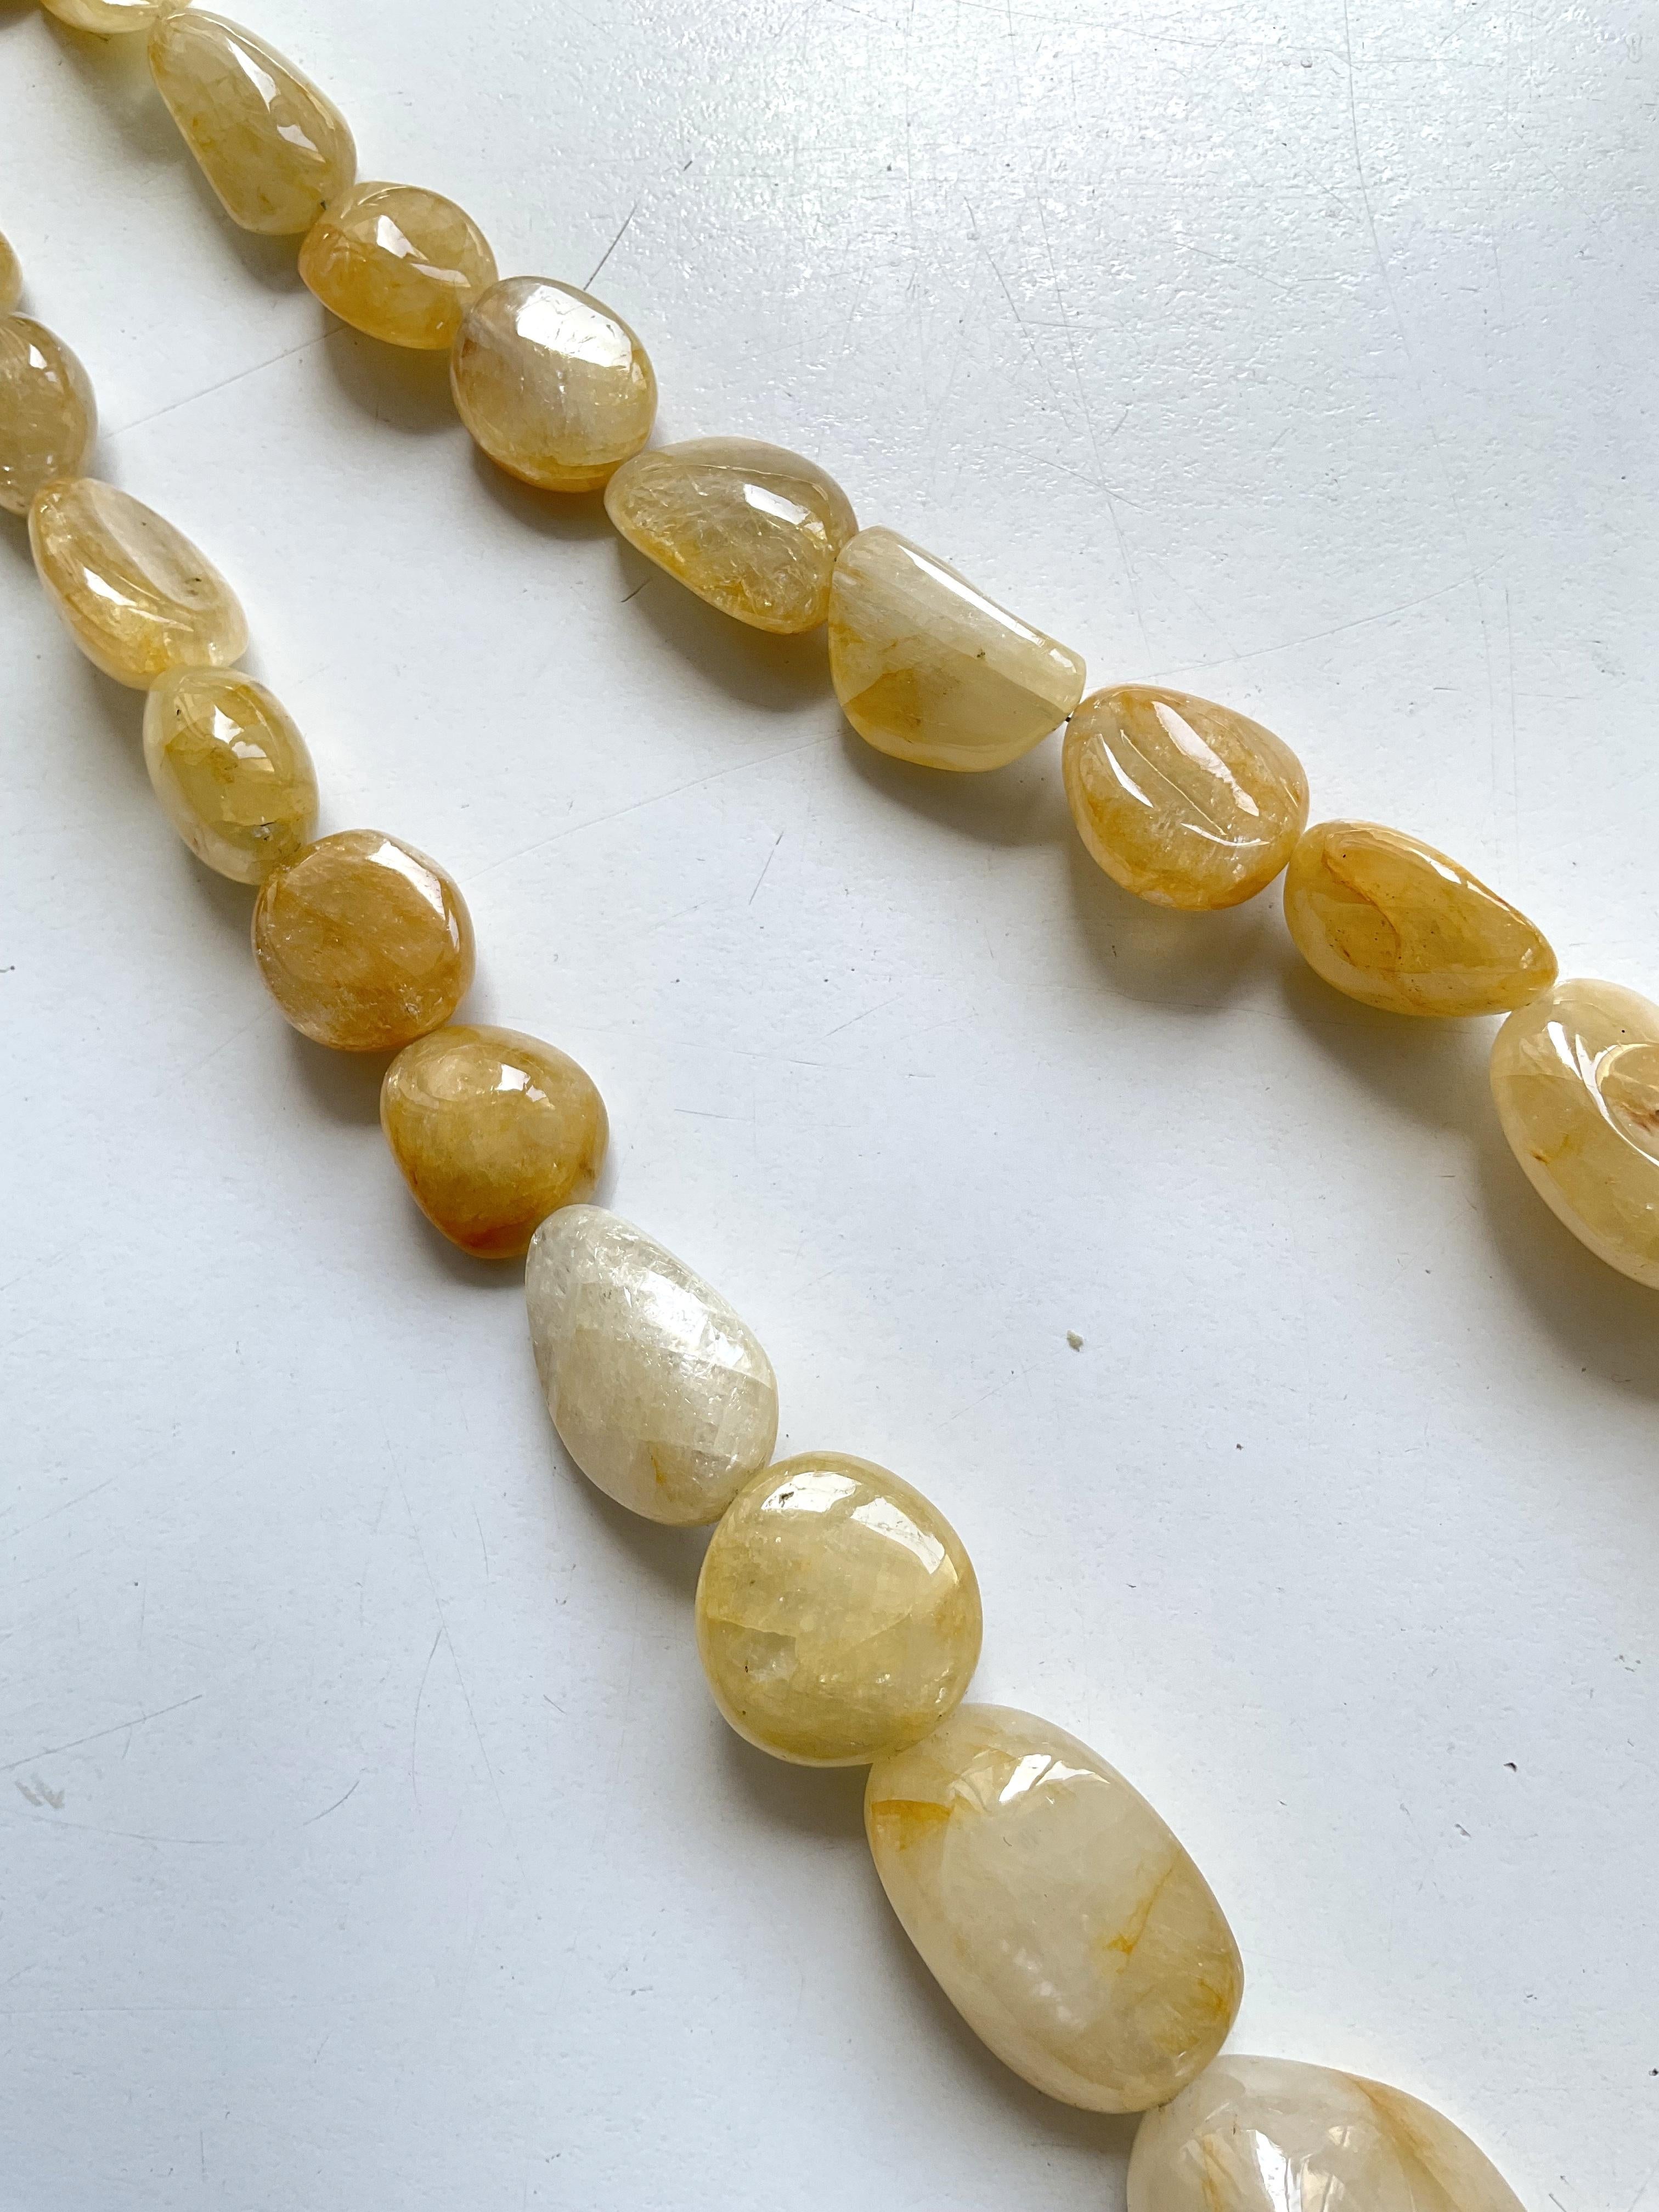 1111.20 Carats Big Size Yellow Sapphire Plain Tumbled Natural Gemstone Necklace In New Condition For Sale In Jaipur, RJ